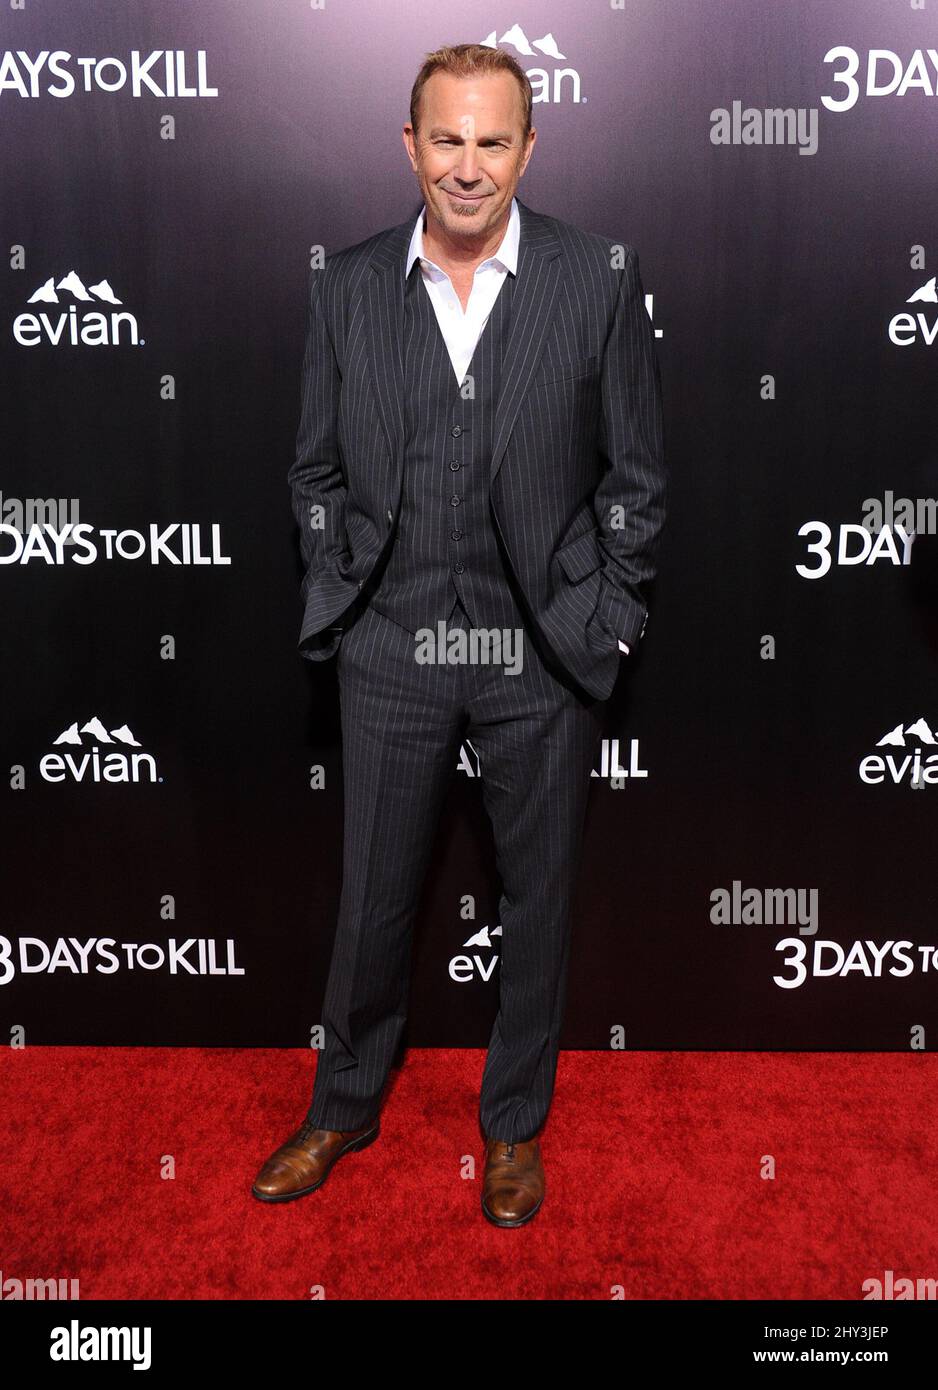 Kevin Costner bei der US-Premiere „3 Days to Kill“ im ArcLight Theater in Los Angeles, USA. Stockfoto